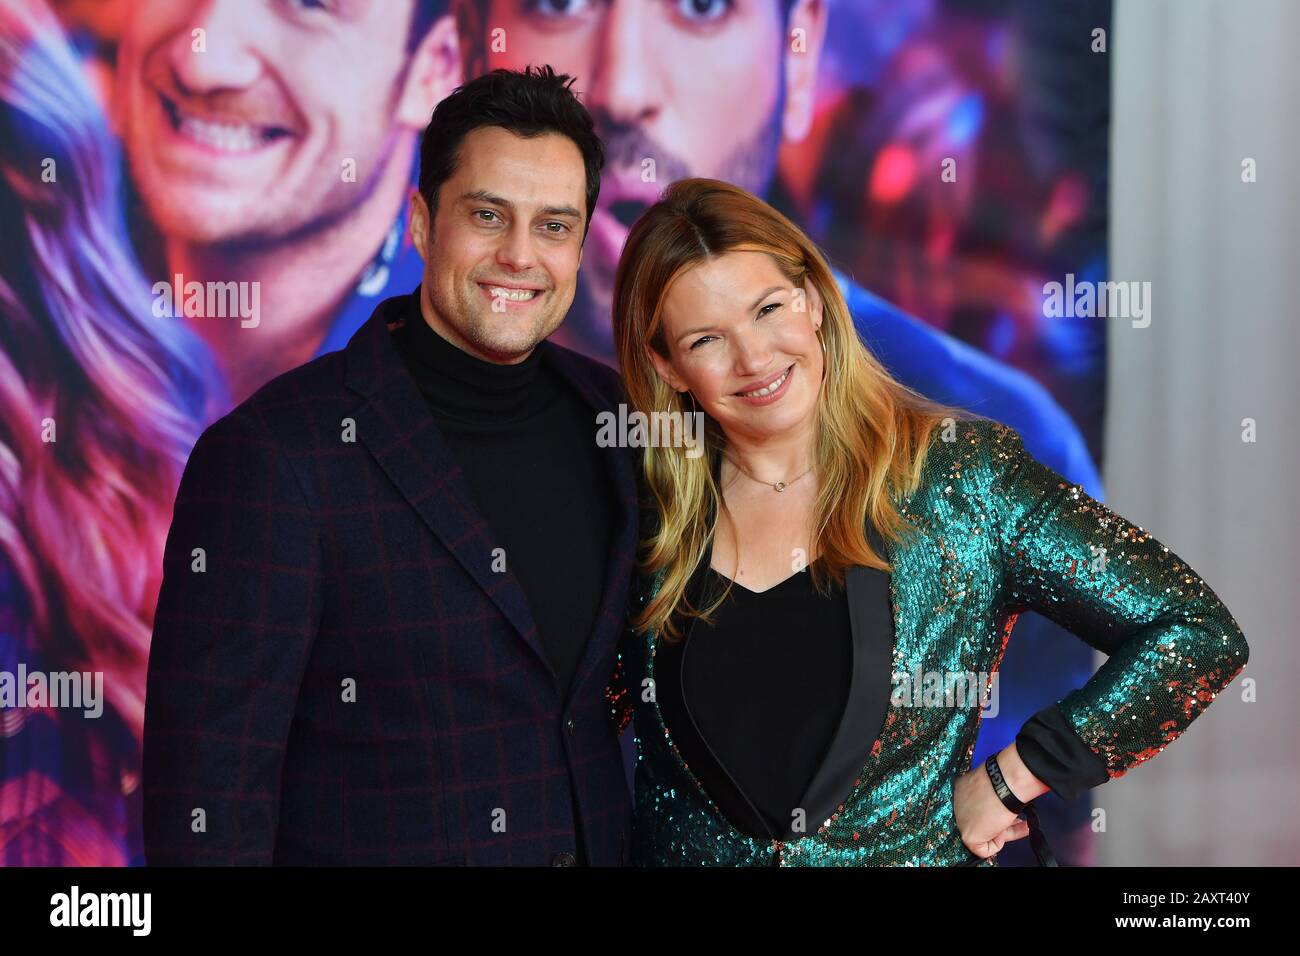 Munich, Deutschland. 12th Feb, 2020. Sports presenter Jessica Kastrop with her husband Roman Libbertz. Red carpet, red carpet, arrival. Film premiere, cinema premiere NIGHTLIFE on February 12th, 2020 at Mathaeser Kino in Muenchen, | usage worldwide Credit: dpa/Alamy Live News Stock Photo